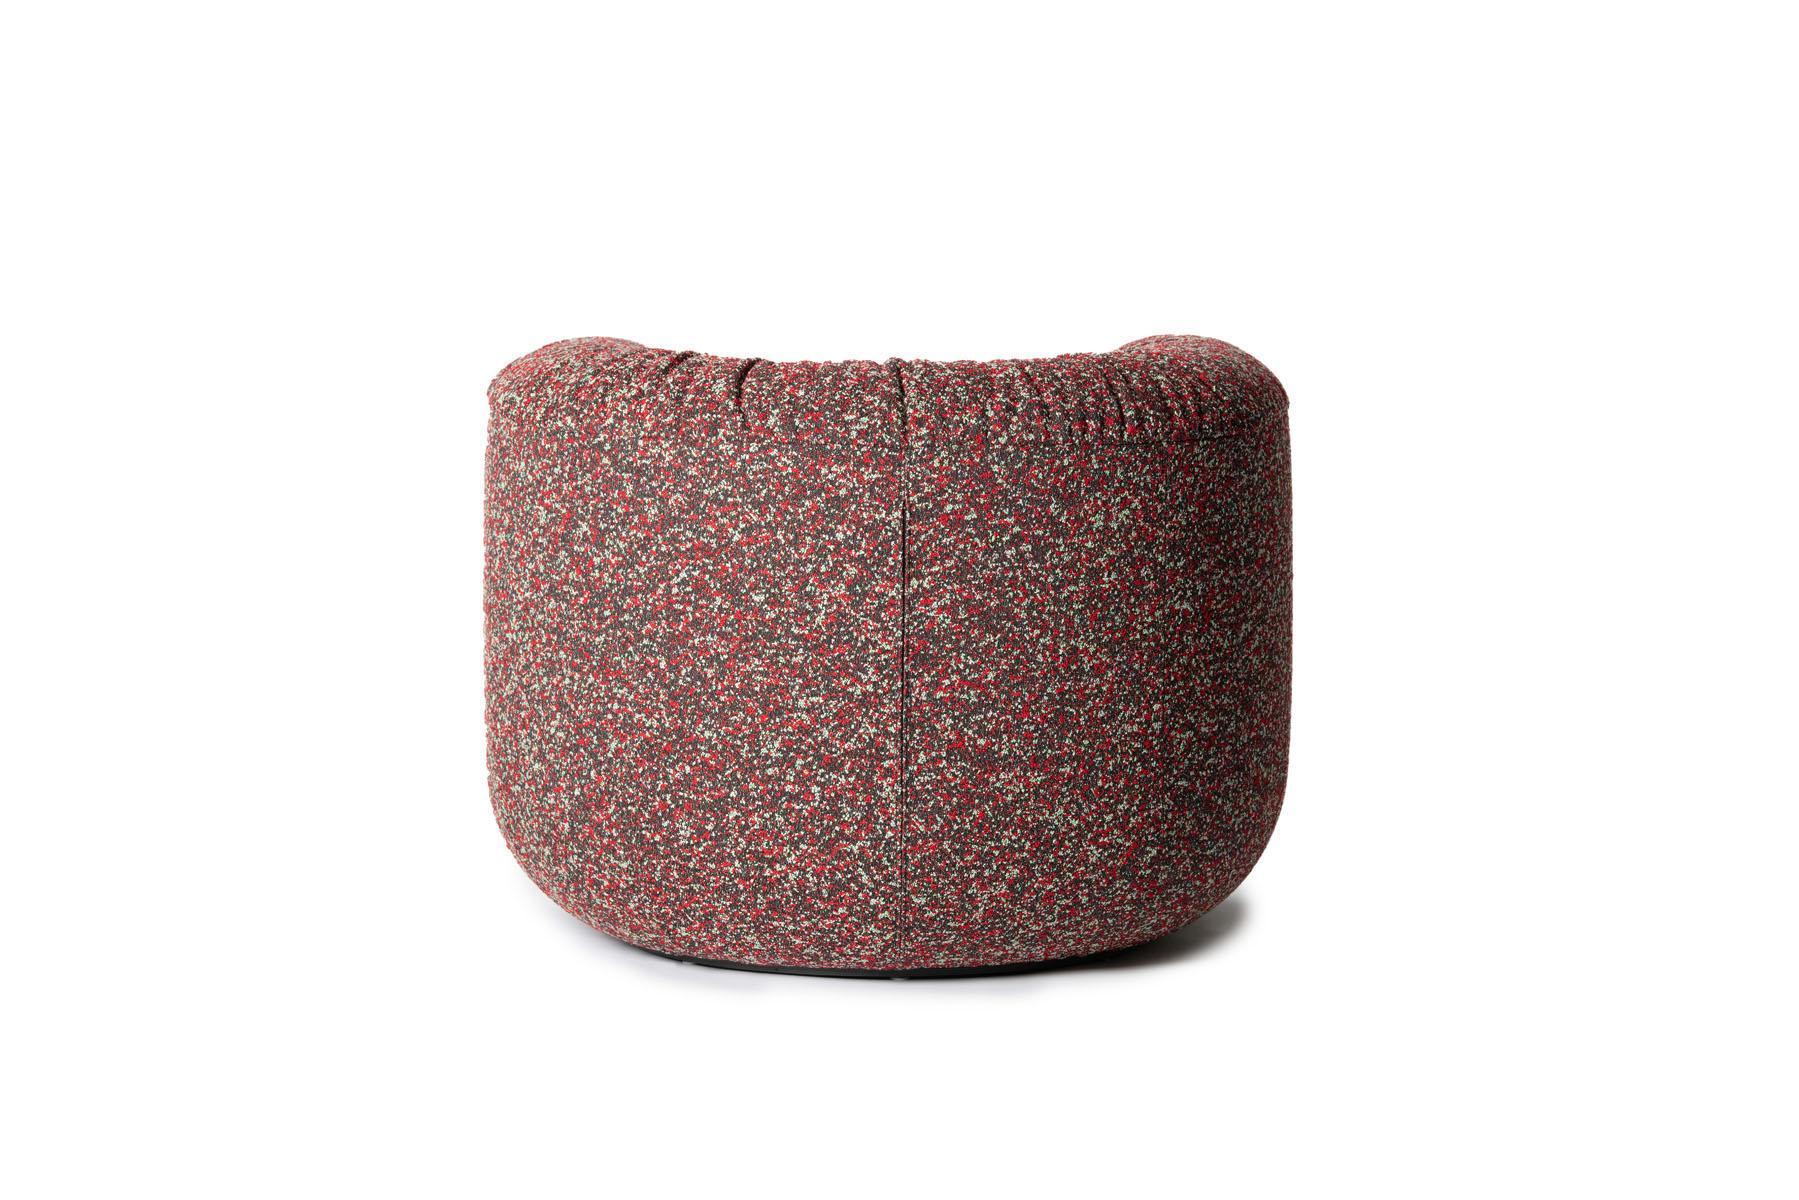 Swiss De Sede DS-707 Armchair in Atom Kvadrat Upholstery by Philippe Malouin For Sale